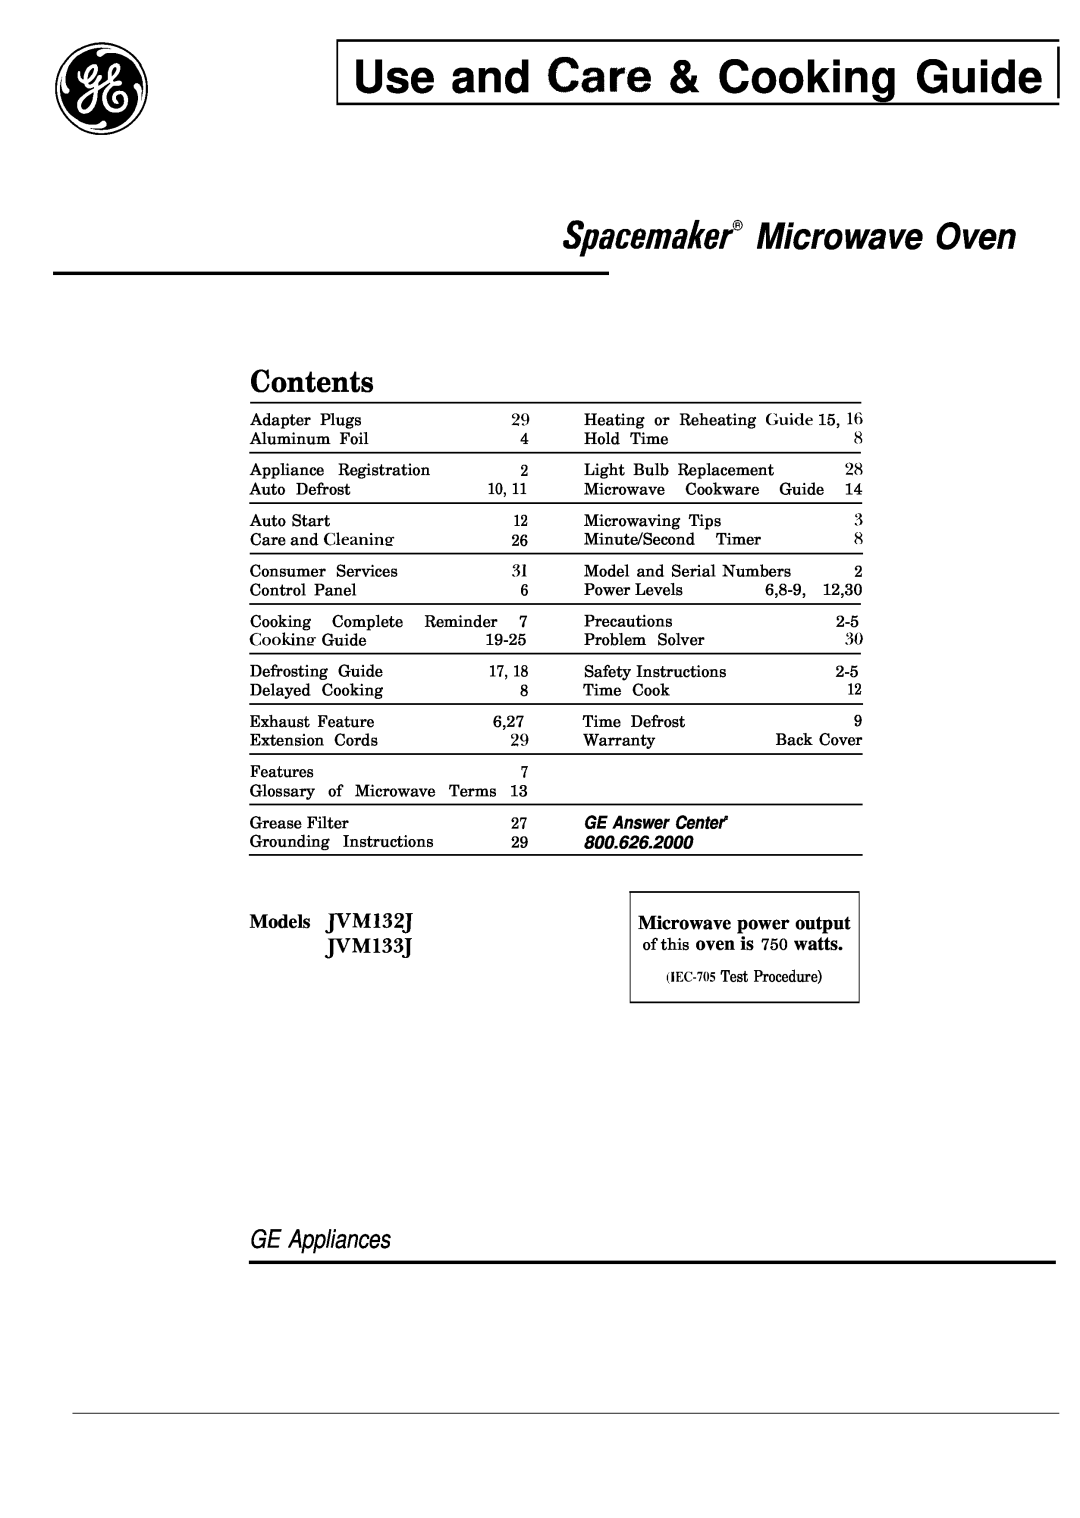 GE 49-8261 warranty GE Appliances, Use and Care & Cooking Guide, Spacemaker@ Microwave Oven, Contents, GE Answer Center a 